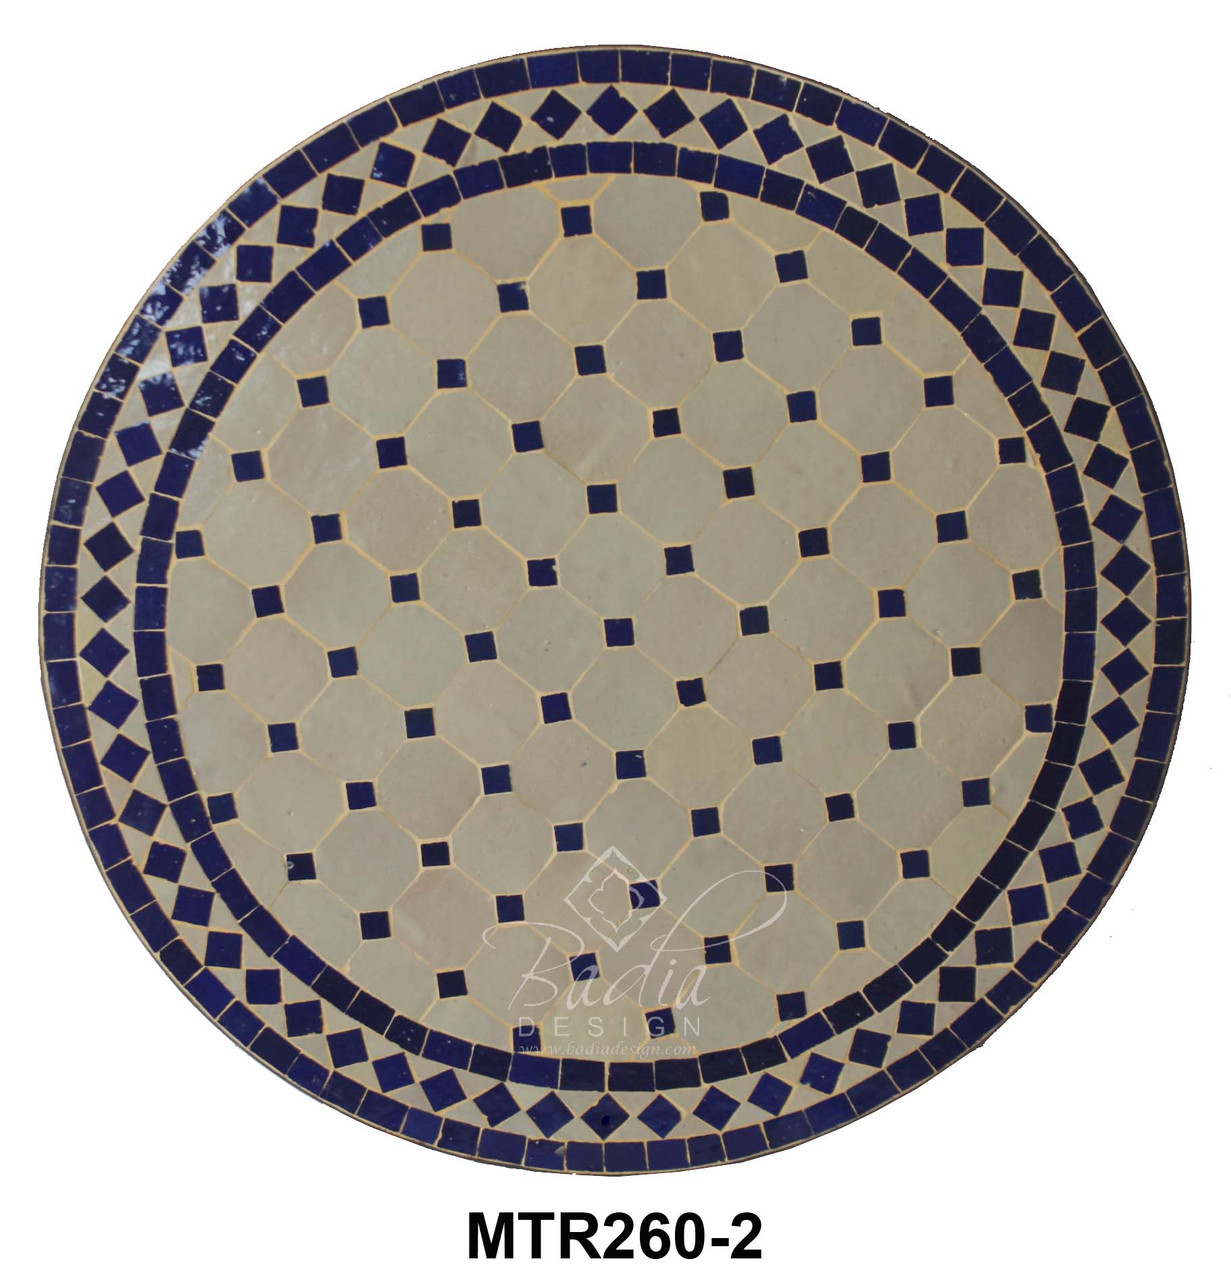 24 Inch Moroccan Round Tile Table Top - MTR260